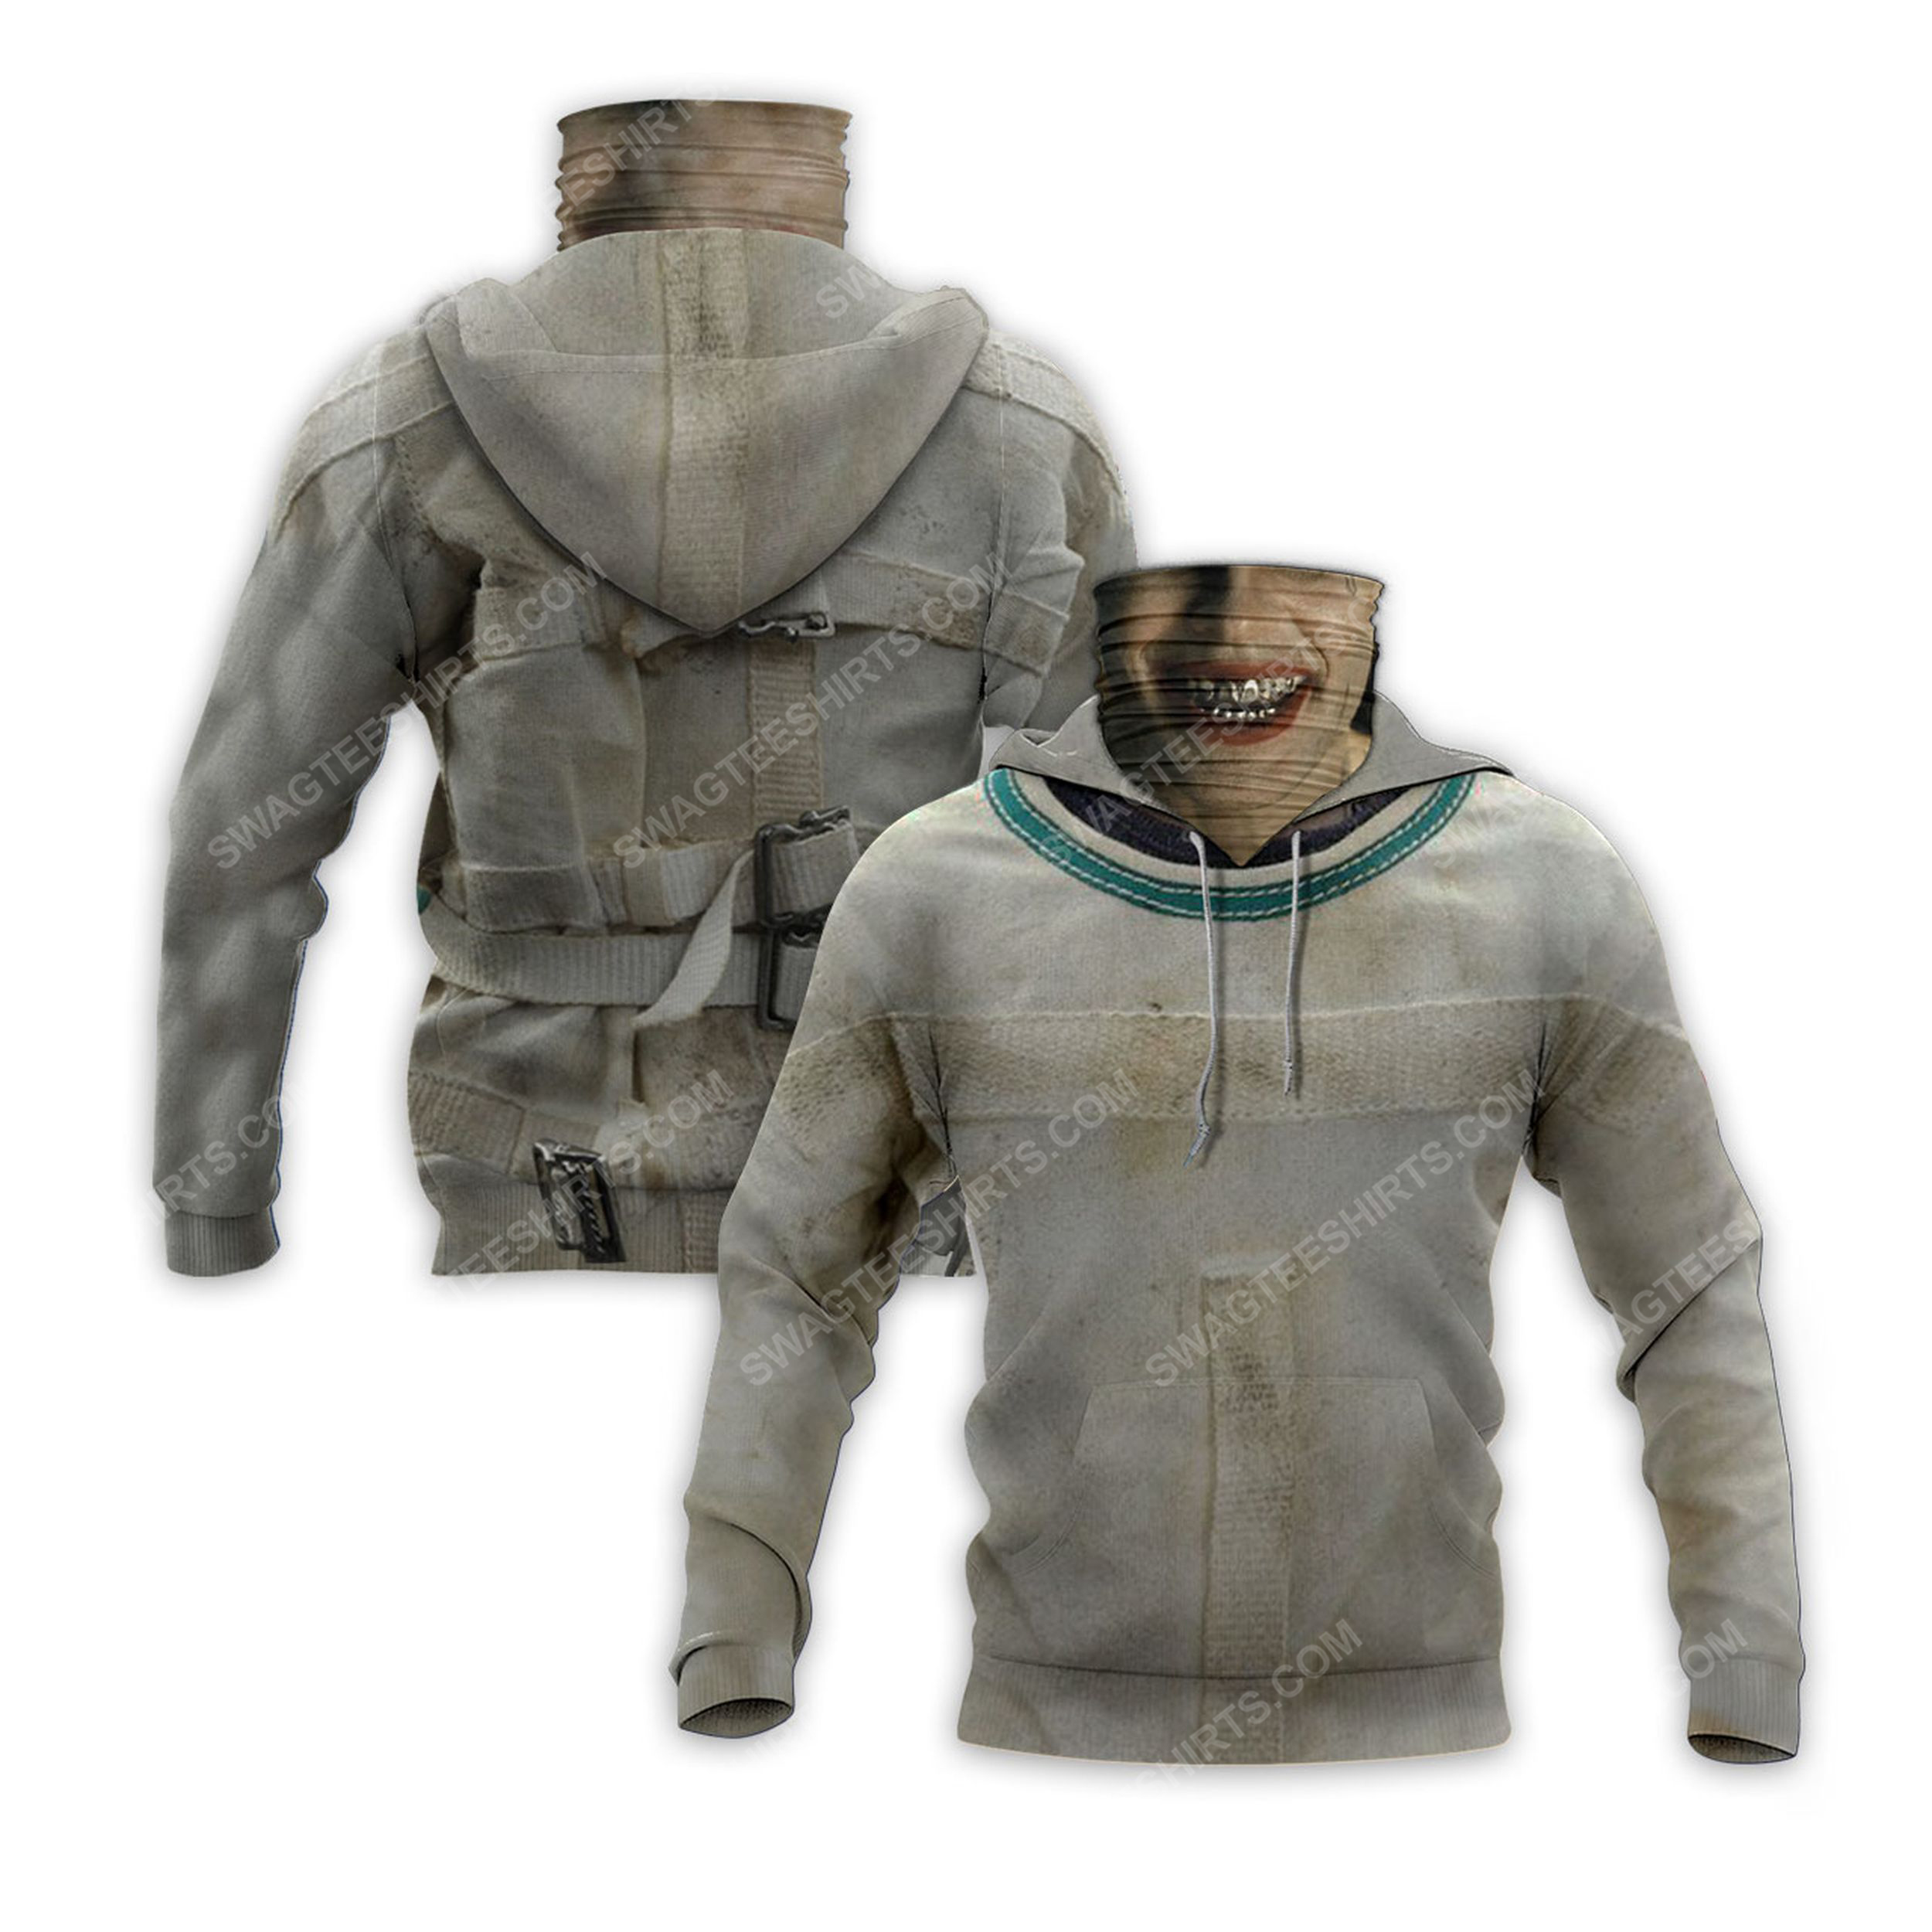 [special edition] Joker suicide squad full print mask hoodie – maria